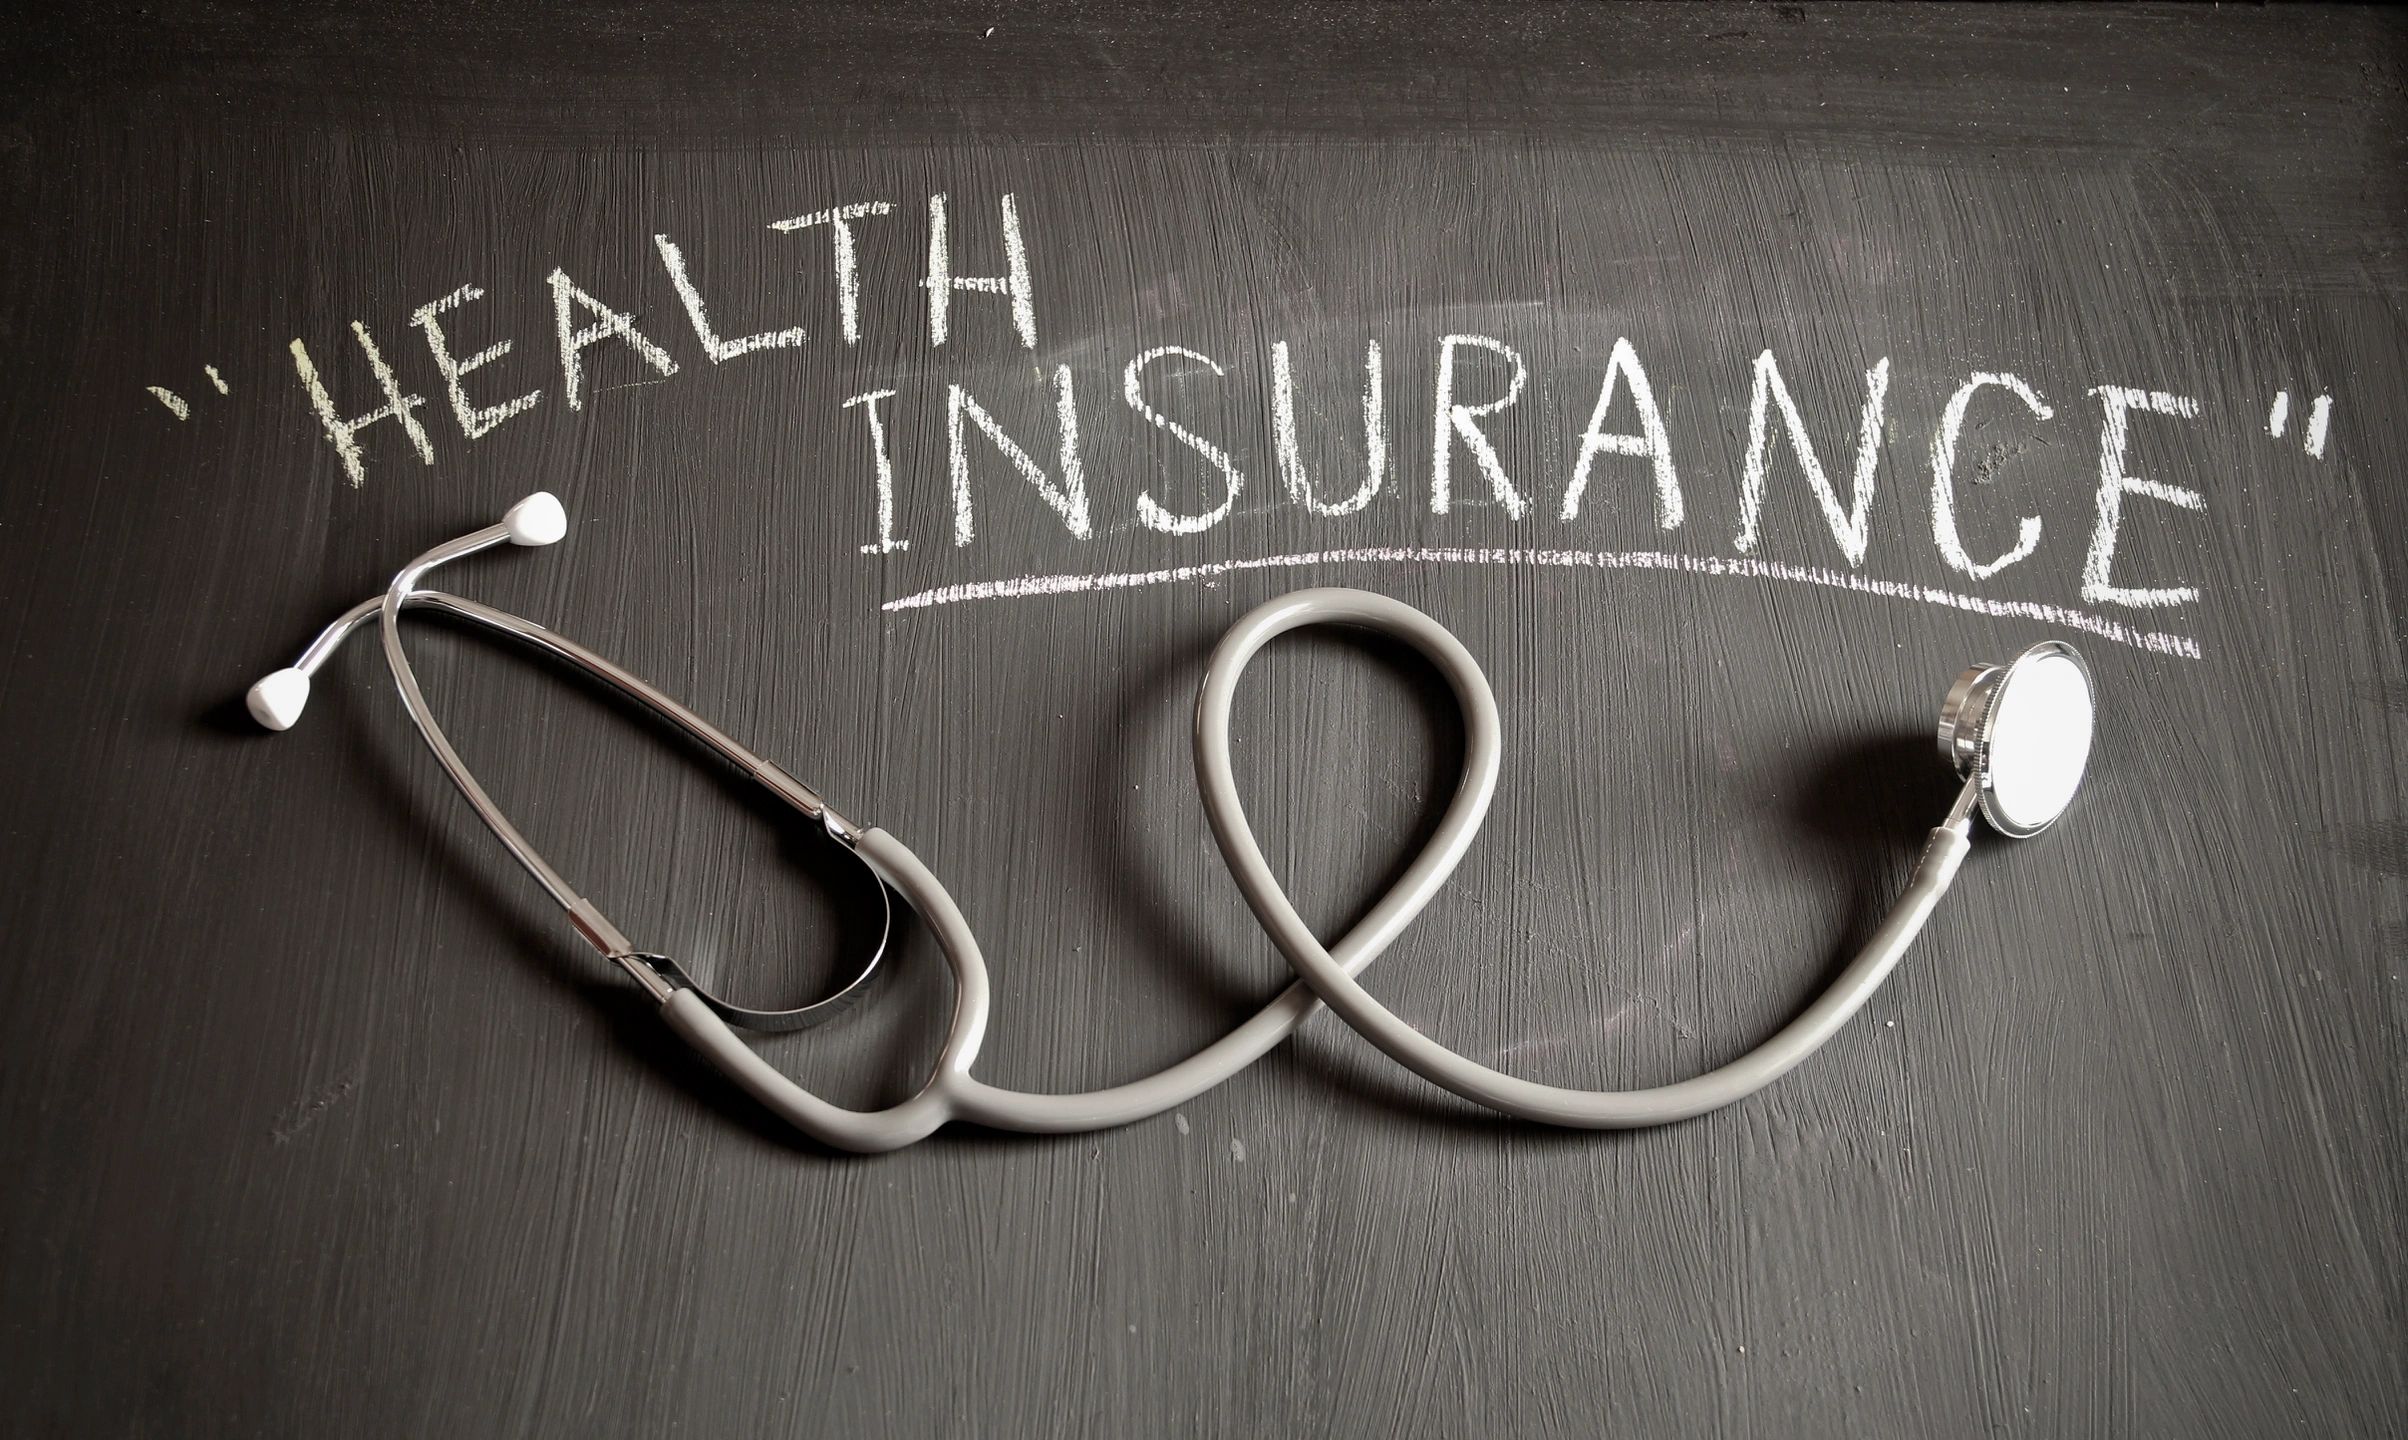 Picture of chalkboard with words, "Health Insurance" written on it with a stethoscope under words. 